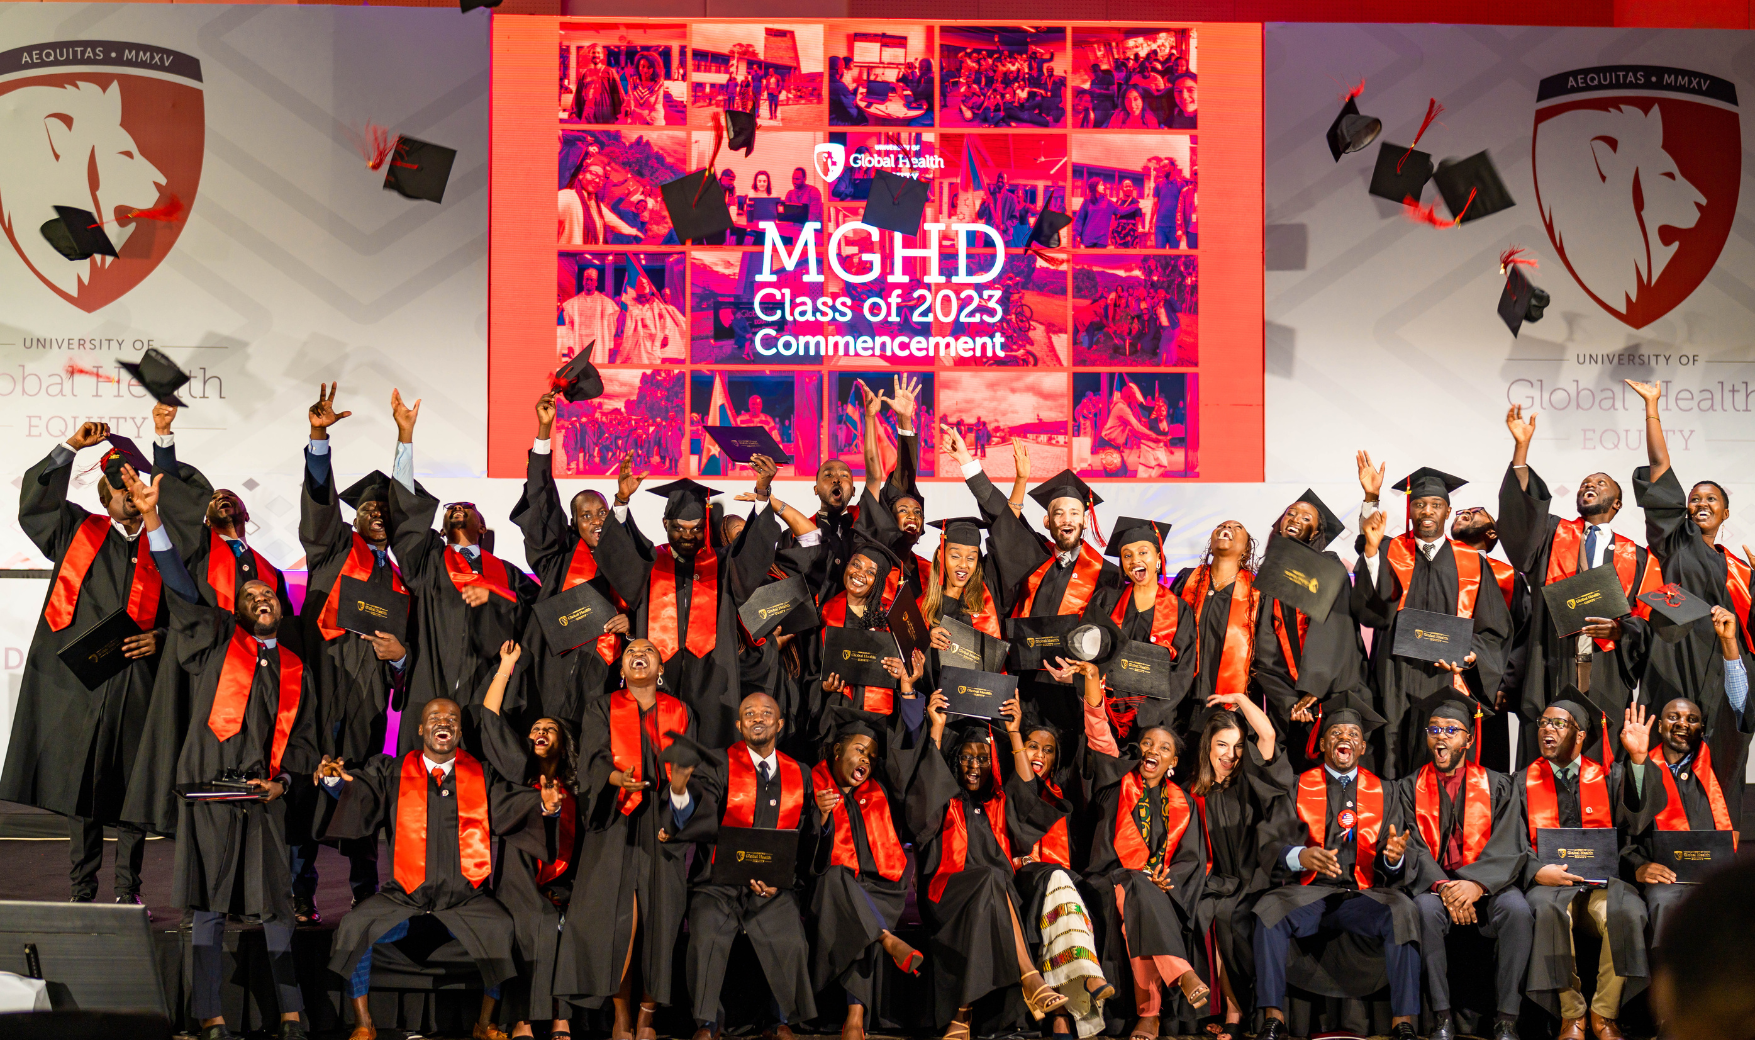 UGHE Celebrates Graduation of 8th Cohort of the Master of Science in Global Health Delivery